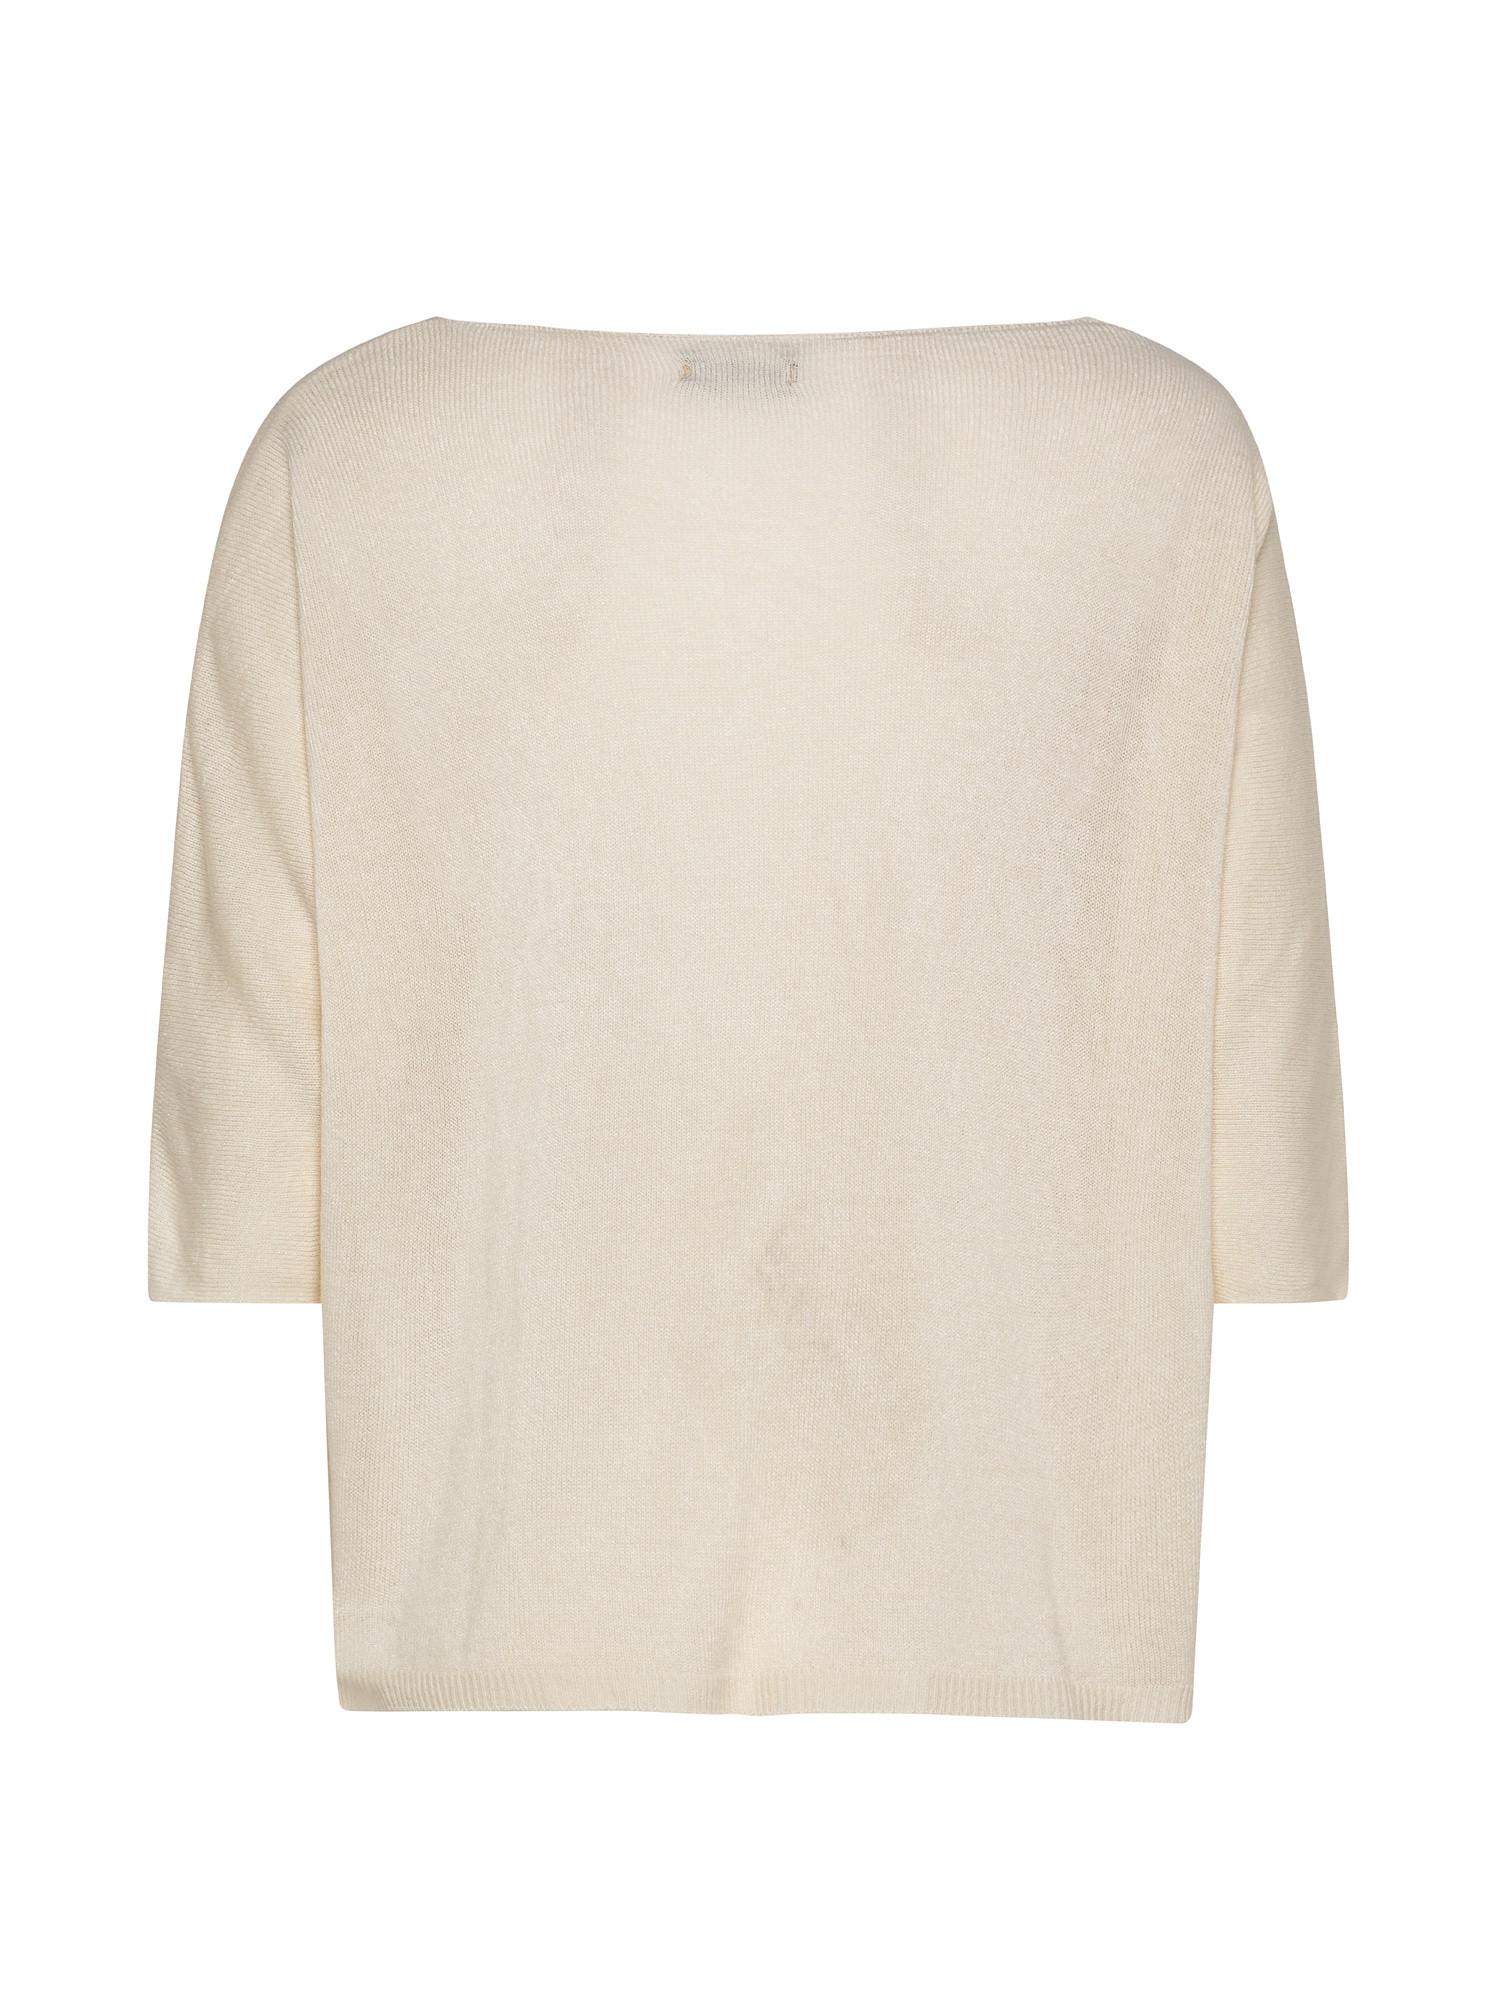 Oversized sweater with neckline, Sand, large image number 1